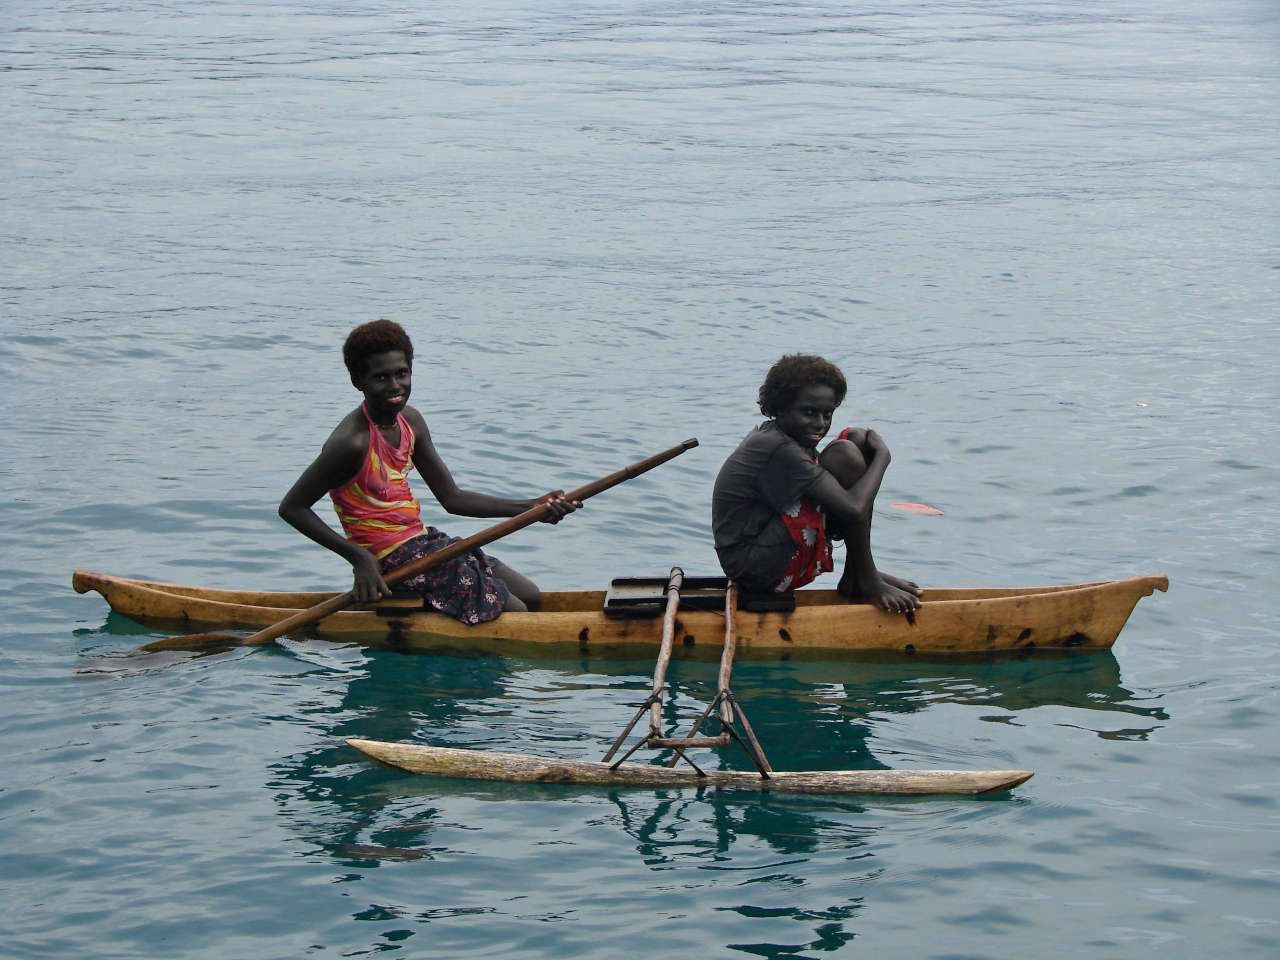 Local girls in an outrigger canoe